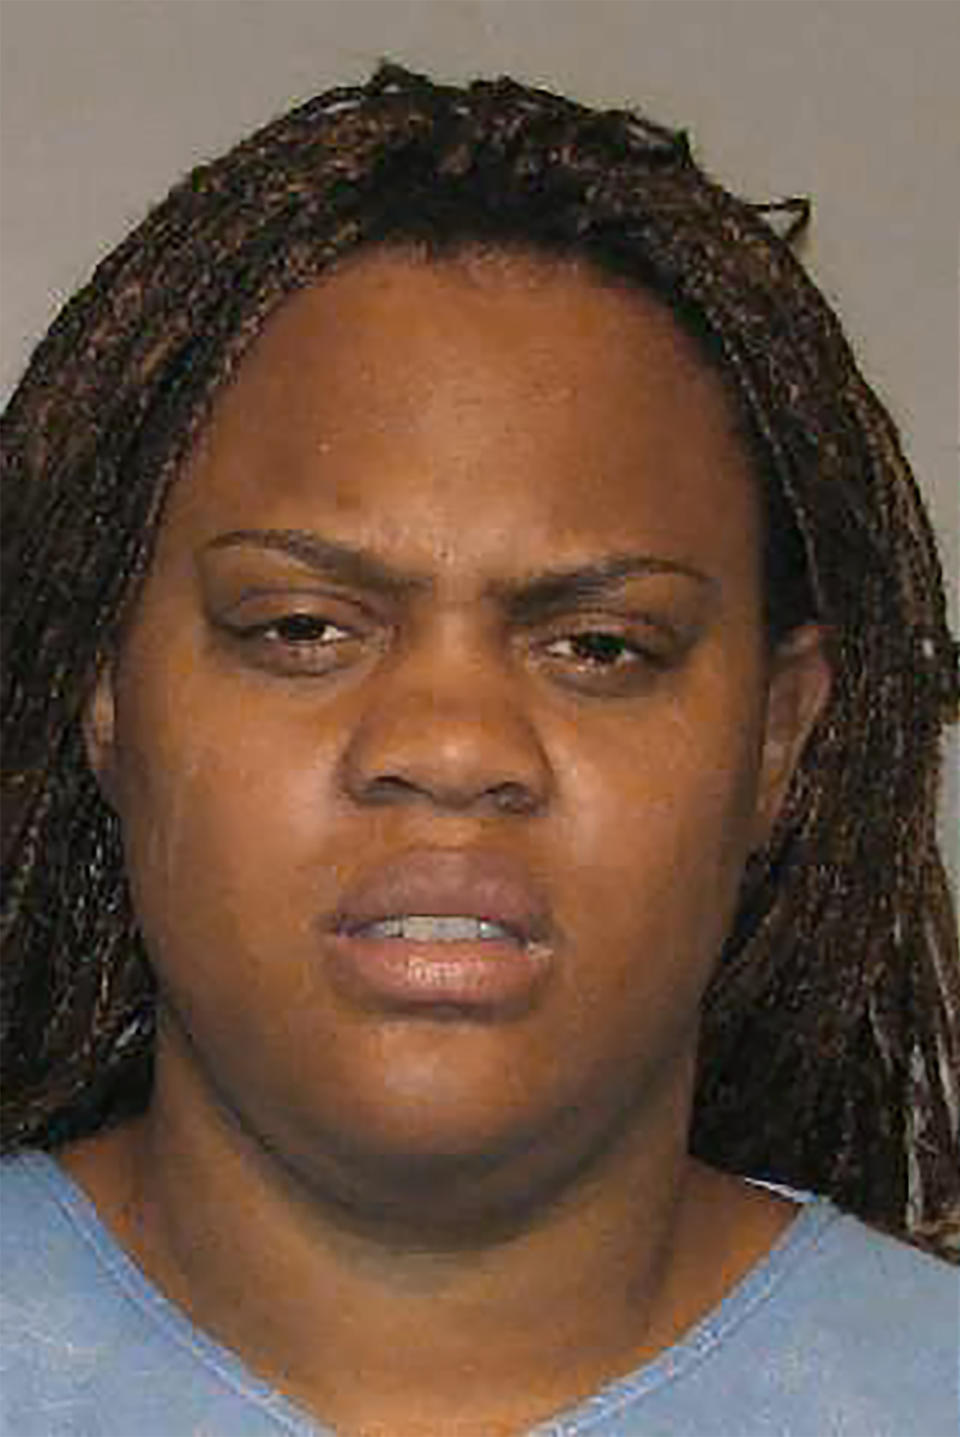 FILE - This undated provided by Caddo Correctional Center in Shreveport, La., shows Ureka Black. Black, who is accused of throwing her sons into a Louisiana lake, killing a 10-month-old and injuring the older child, was found guilty Wednesday, Sept. 13, 2023, authorities said. (Caddo Correctional Center via AP, File)